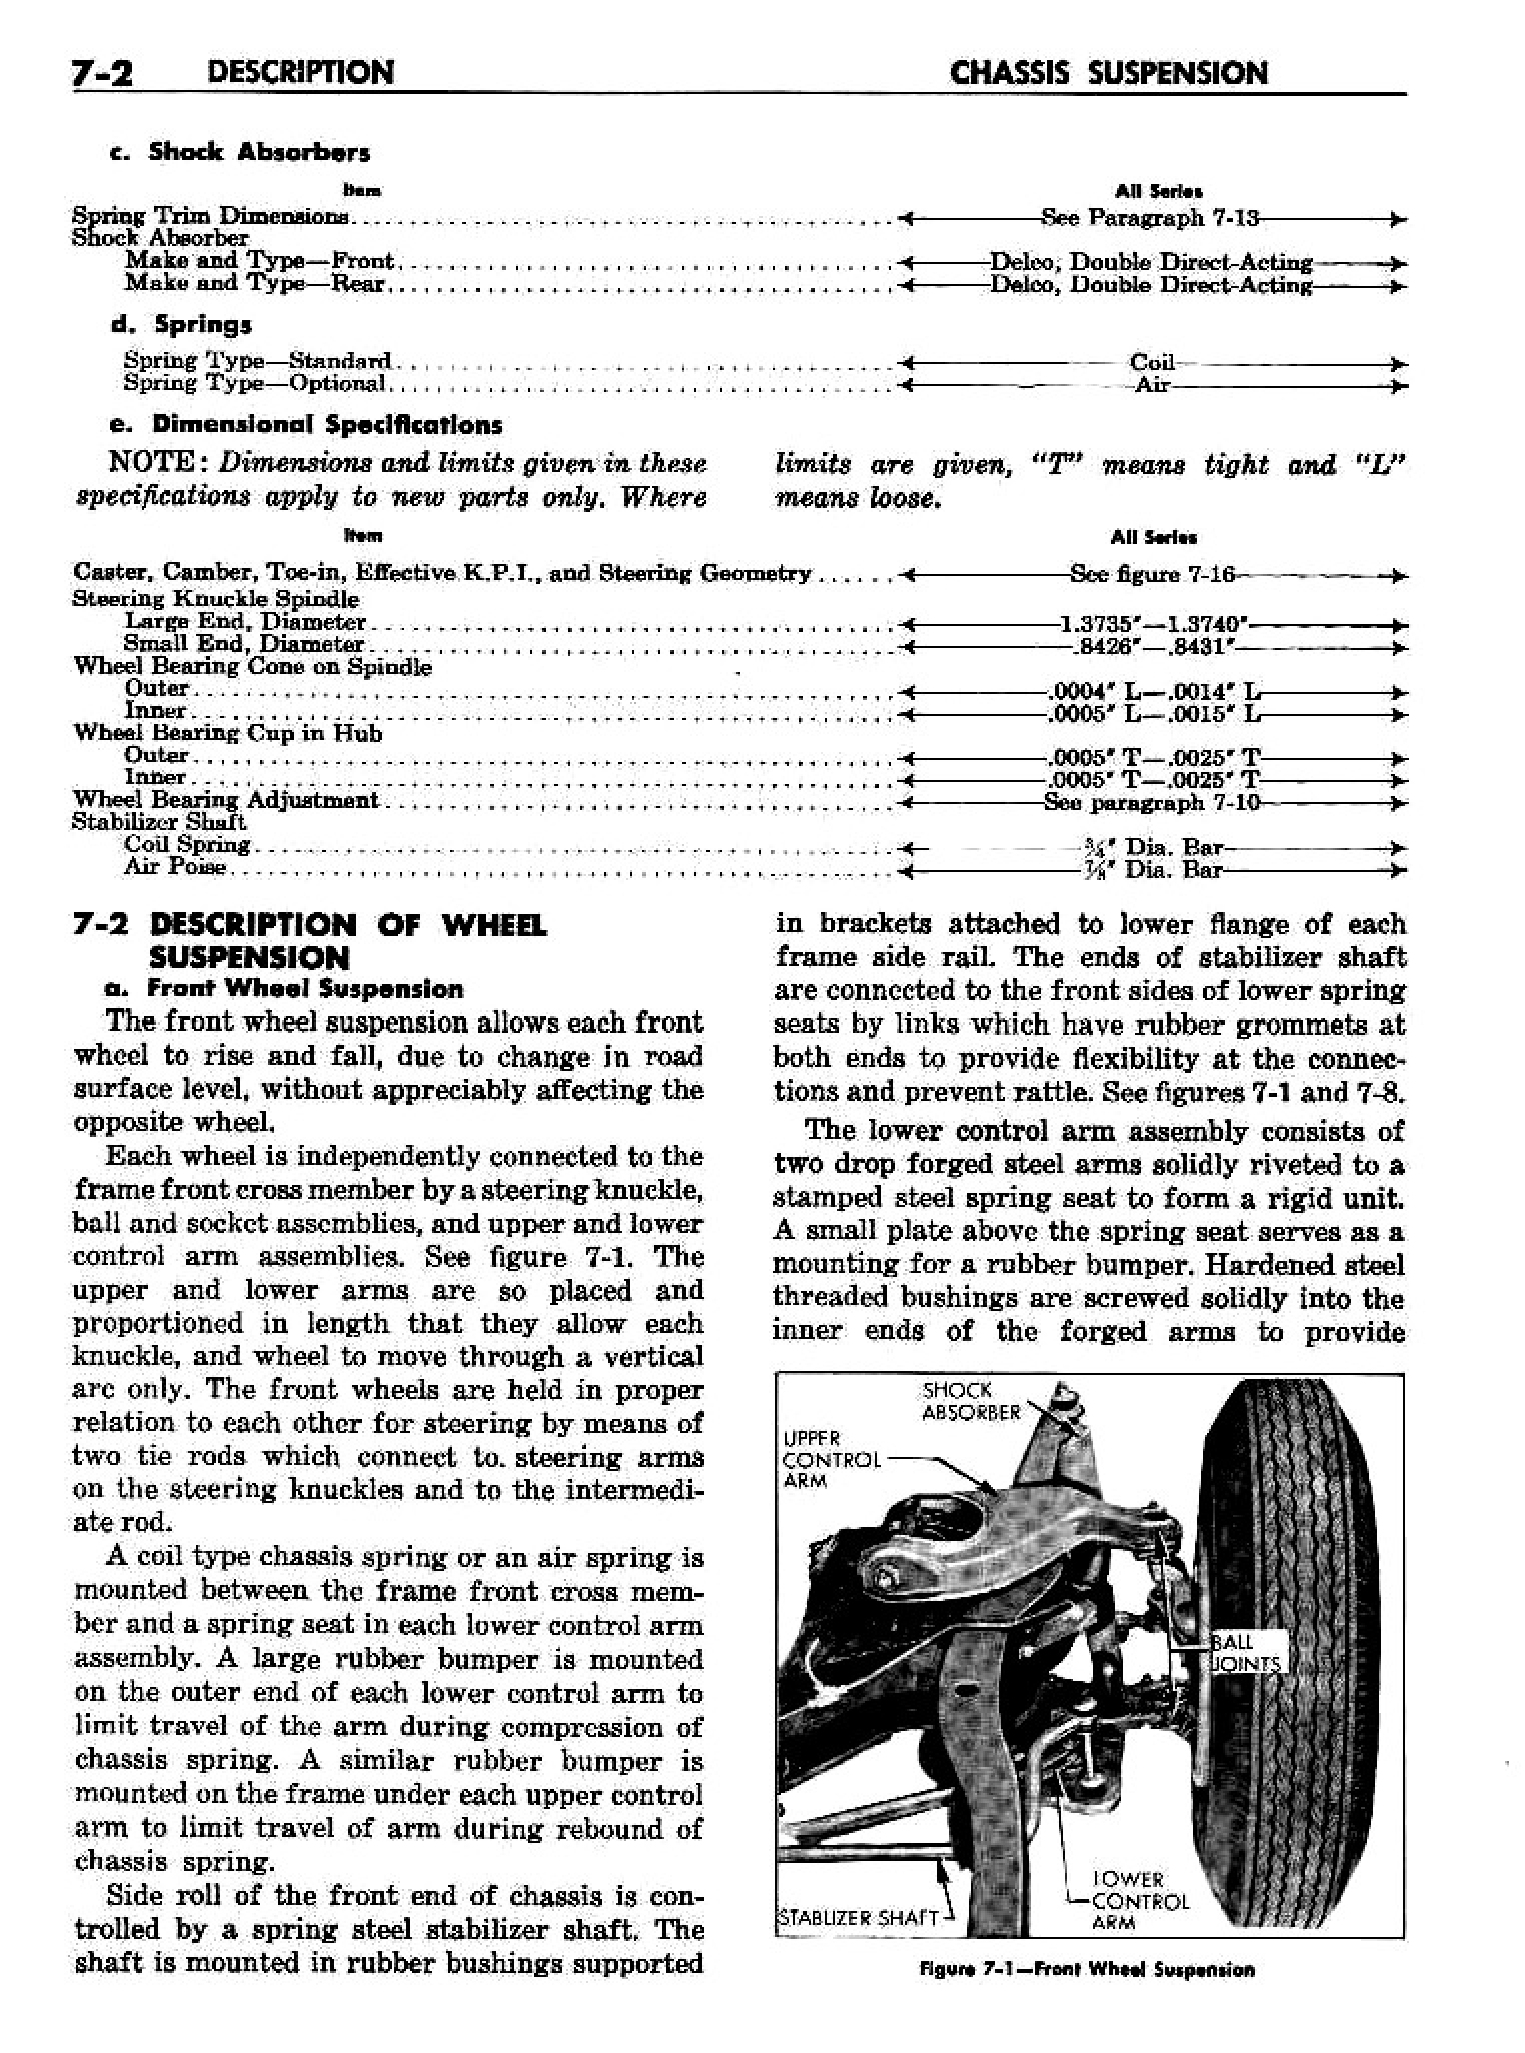 n_08 1958 Buick Shop Manual - Chassis Suspension_2.jpg